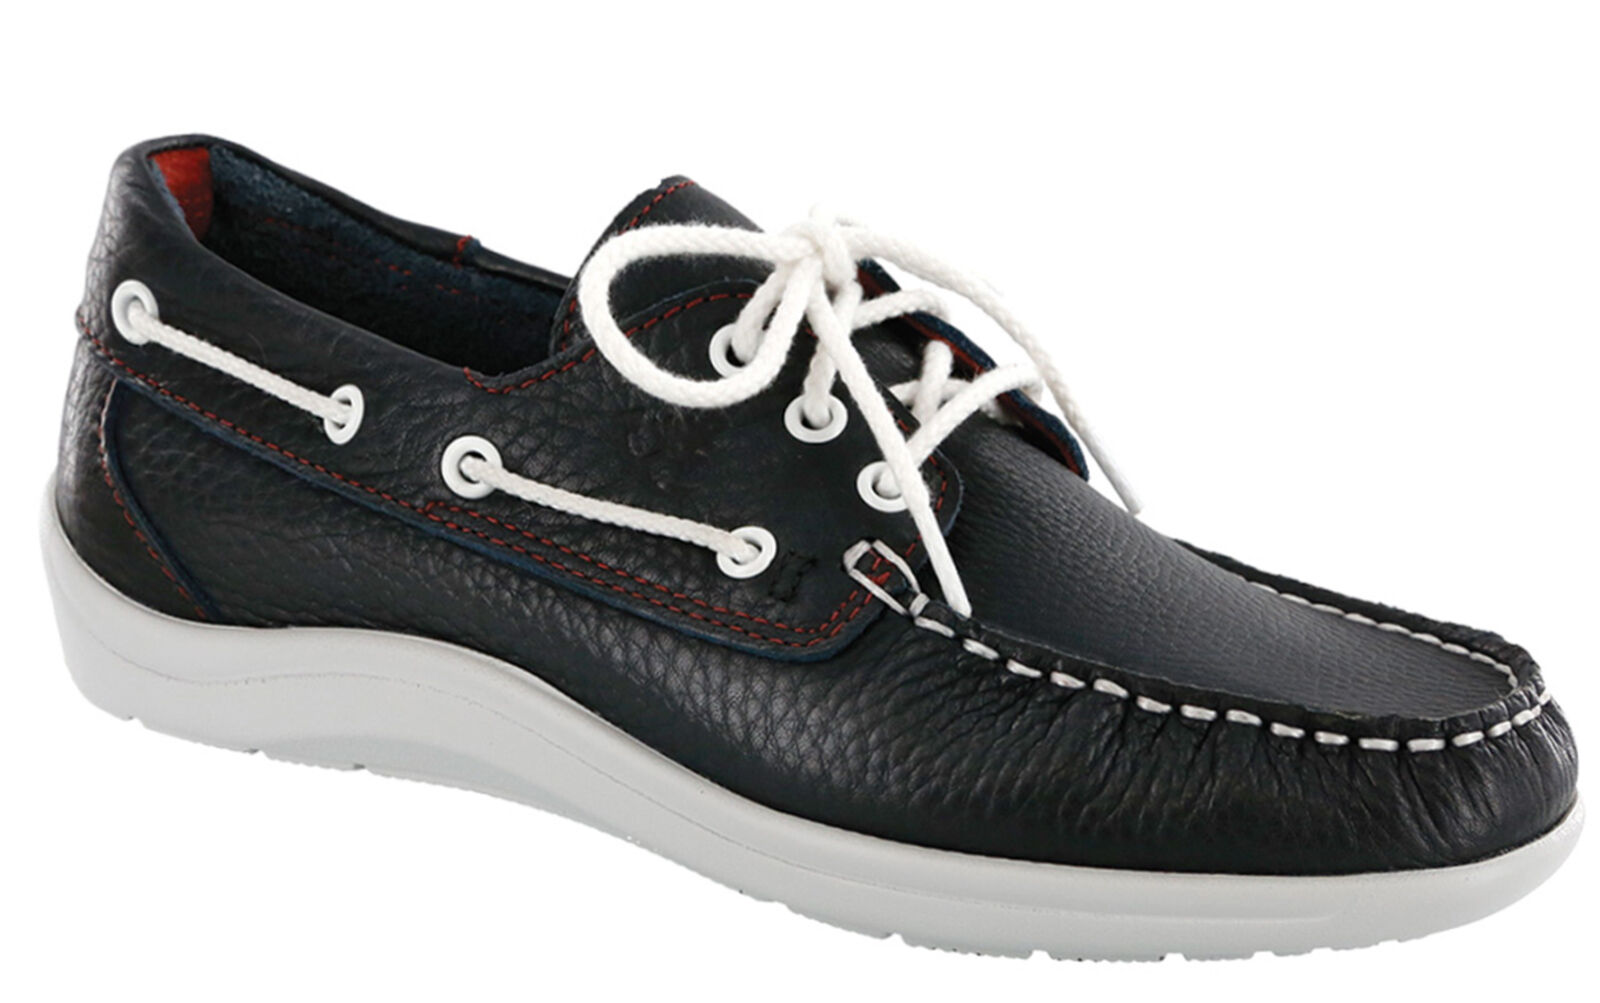 Chatham Colorado II Leather Walking Shoes 